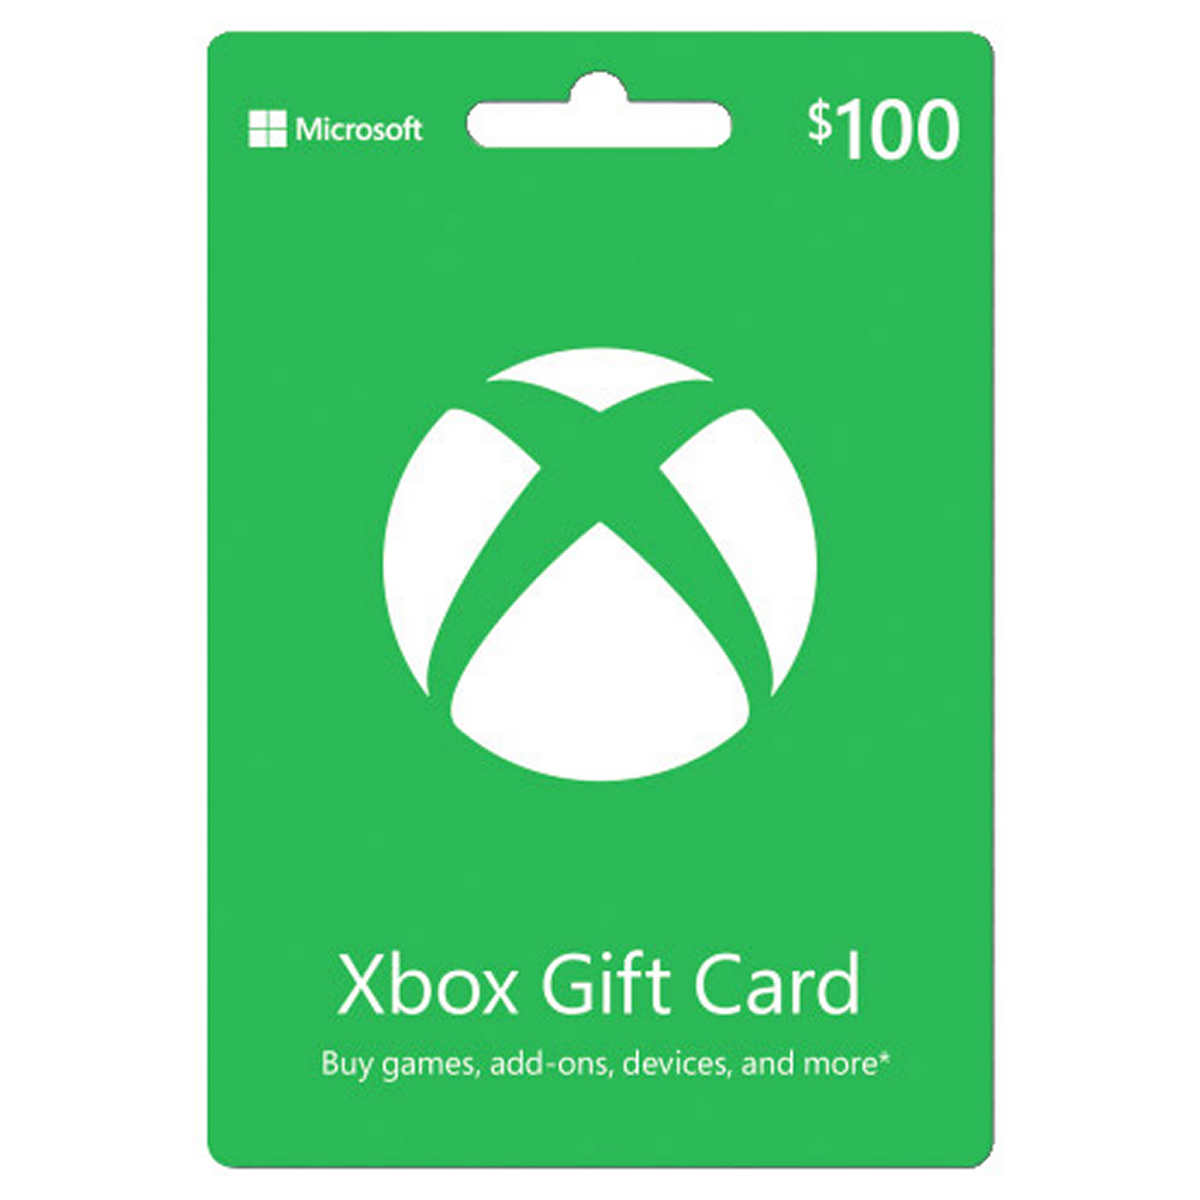 Costco Member In-store Only: $100 Xbox Gift Card for $80